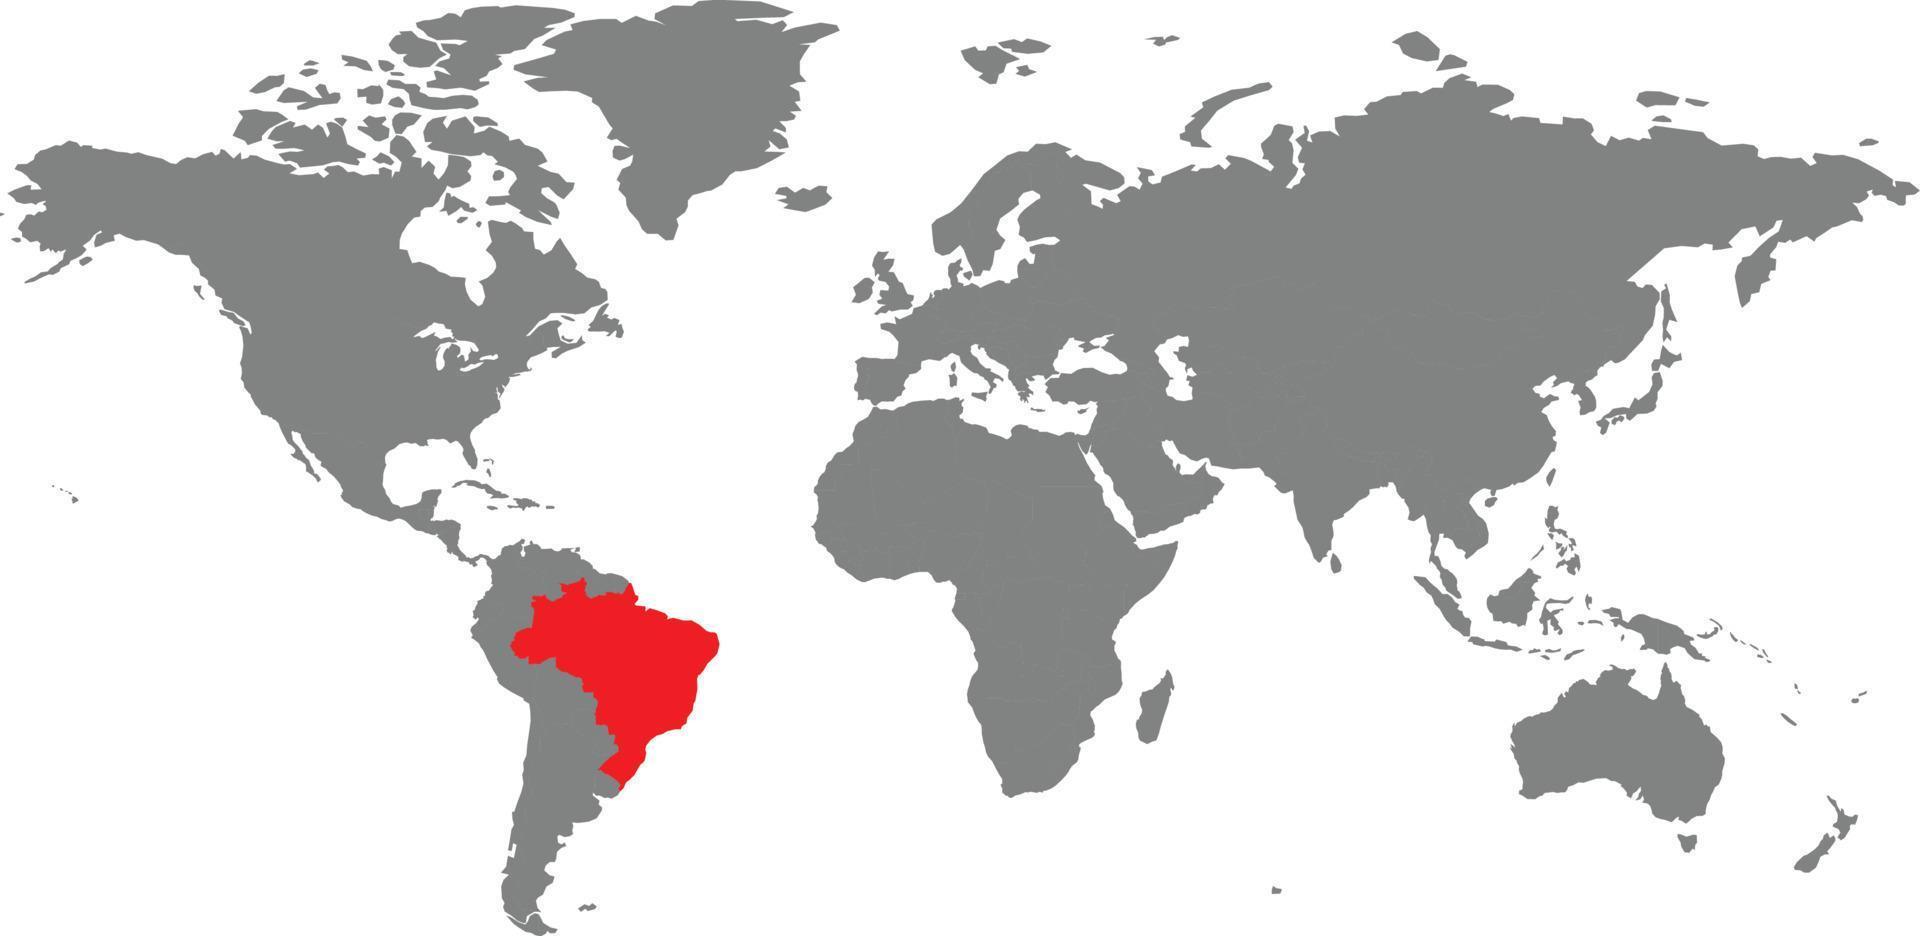 Brazil map on the world map vector